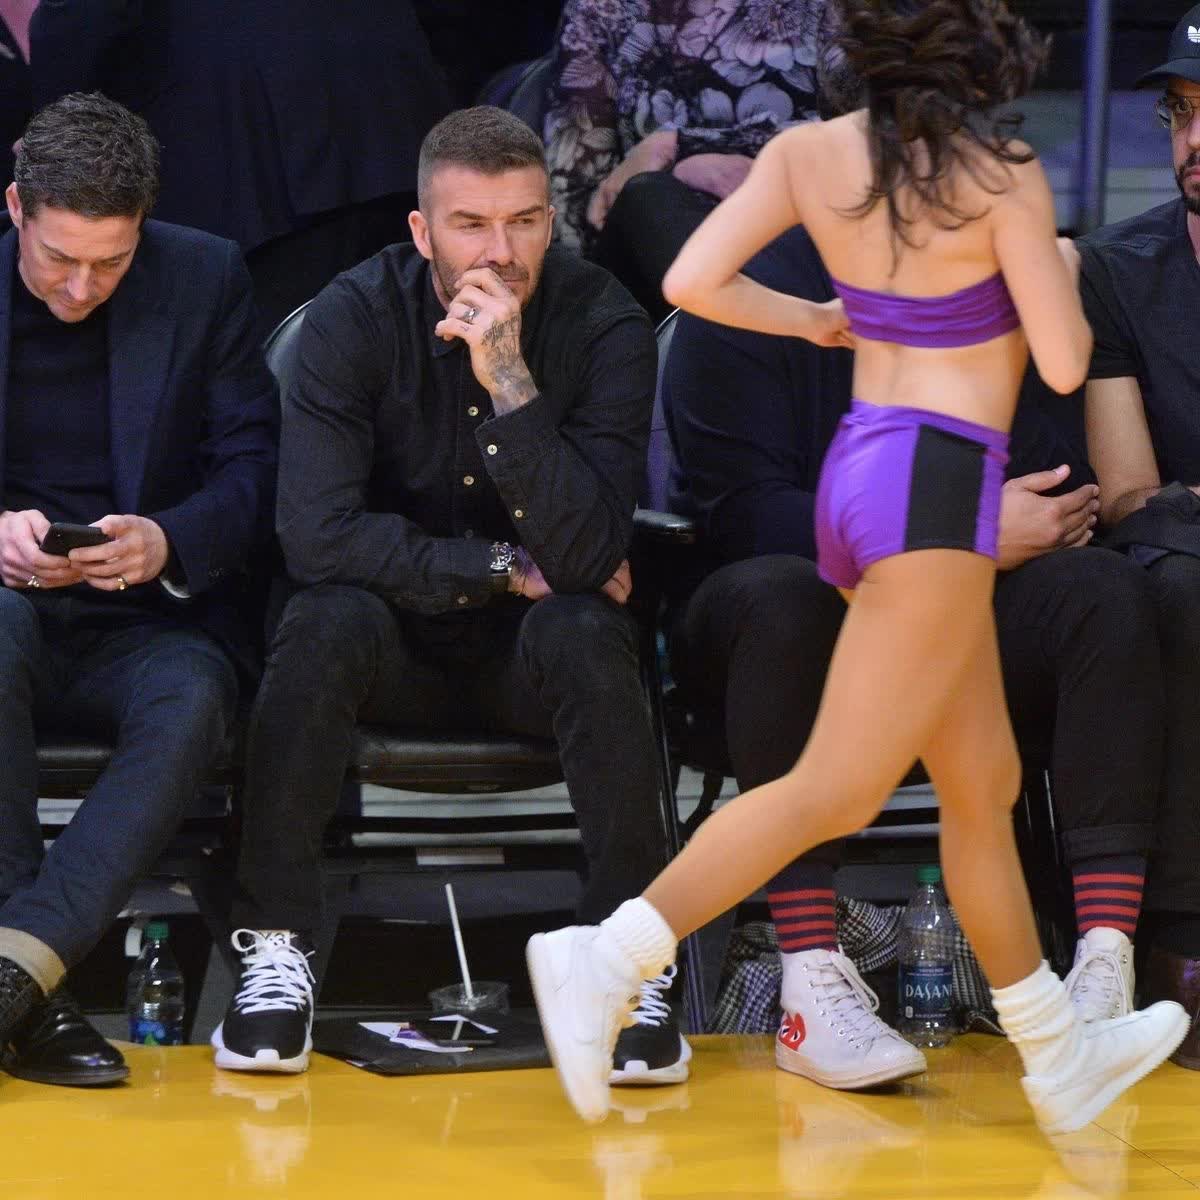 0pay-david-beckham-halsey-and-yungblud-celebrate-the-lakers-win-over-the-pelicans-16791188502471838278138-1679142407011-1679142407108520026360.jpg